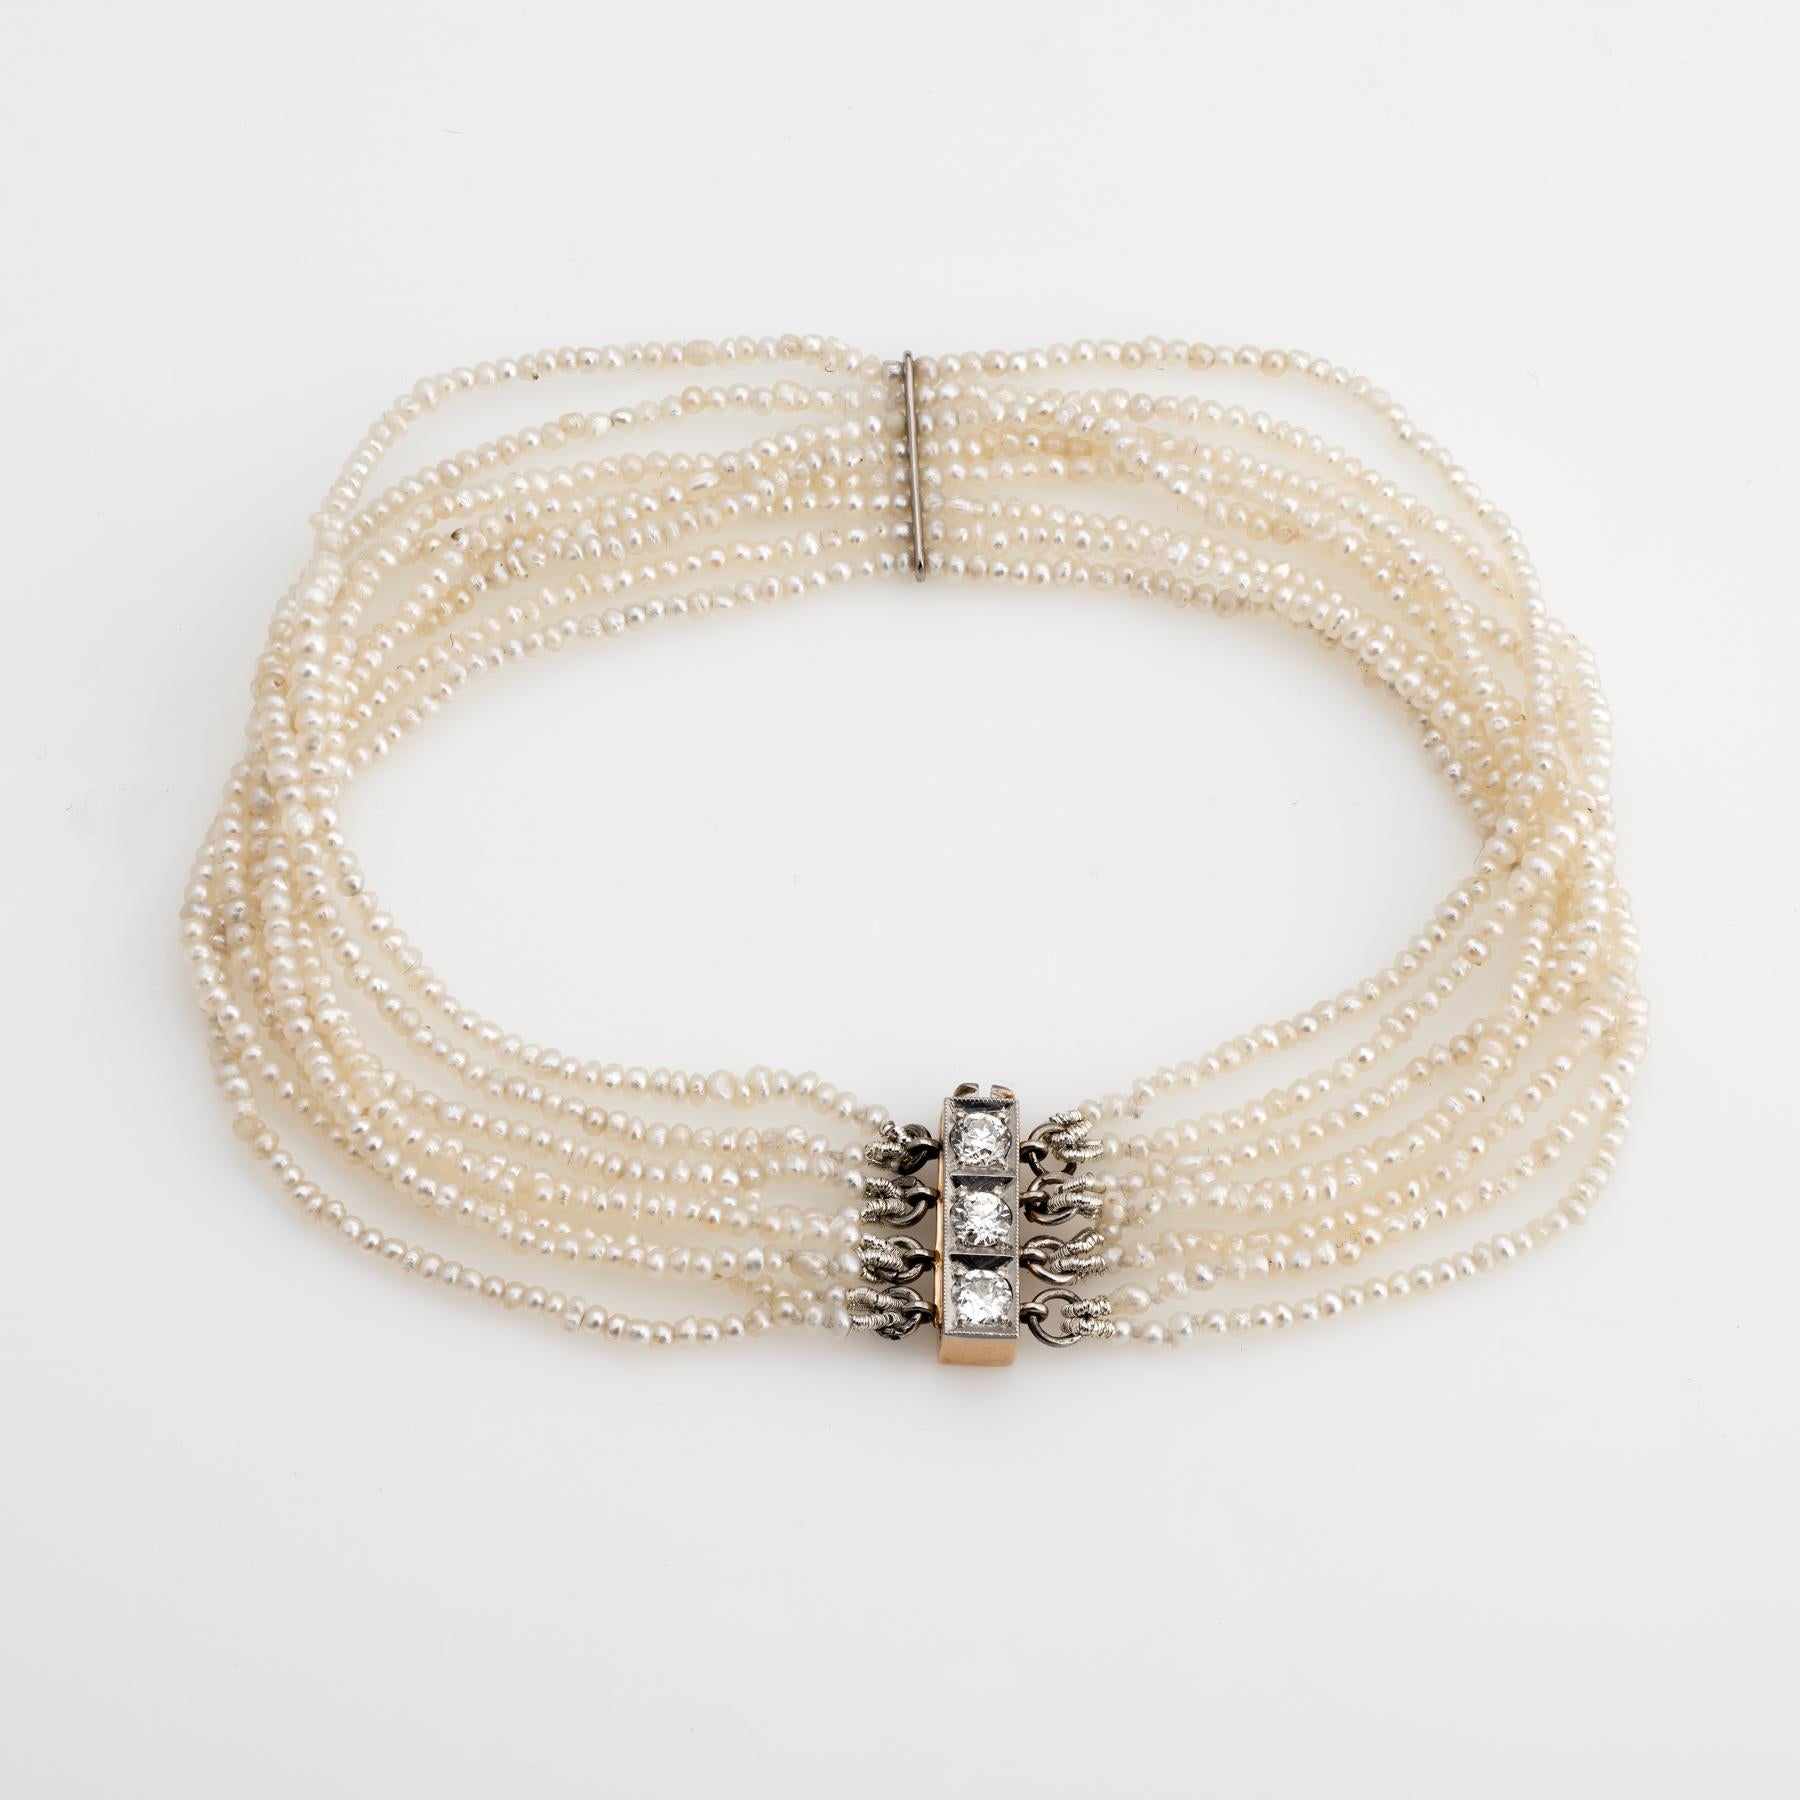 
Finely detailed antique Edwardian bracelet (circa 1910s), finished with a 14 karat yellow gold and platinum diamond set clasp. 

8 strands of natural seed pearls measuring 1.5mm (average). The clasp is set with three estimated 0.10 carat (each) old